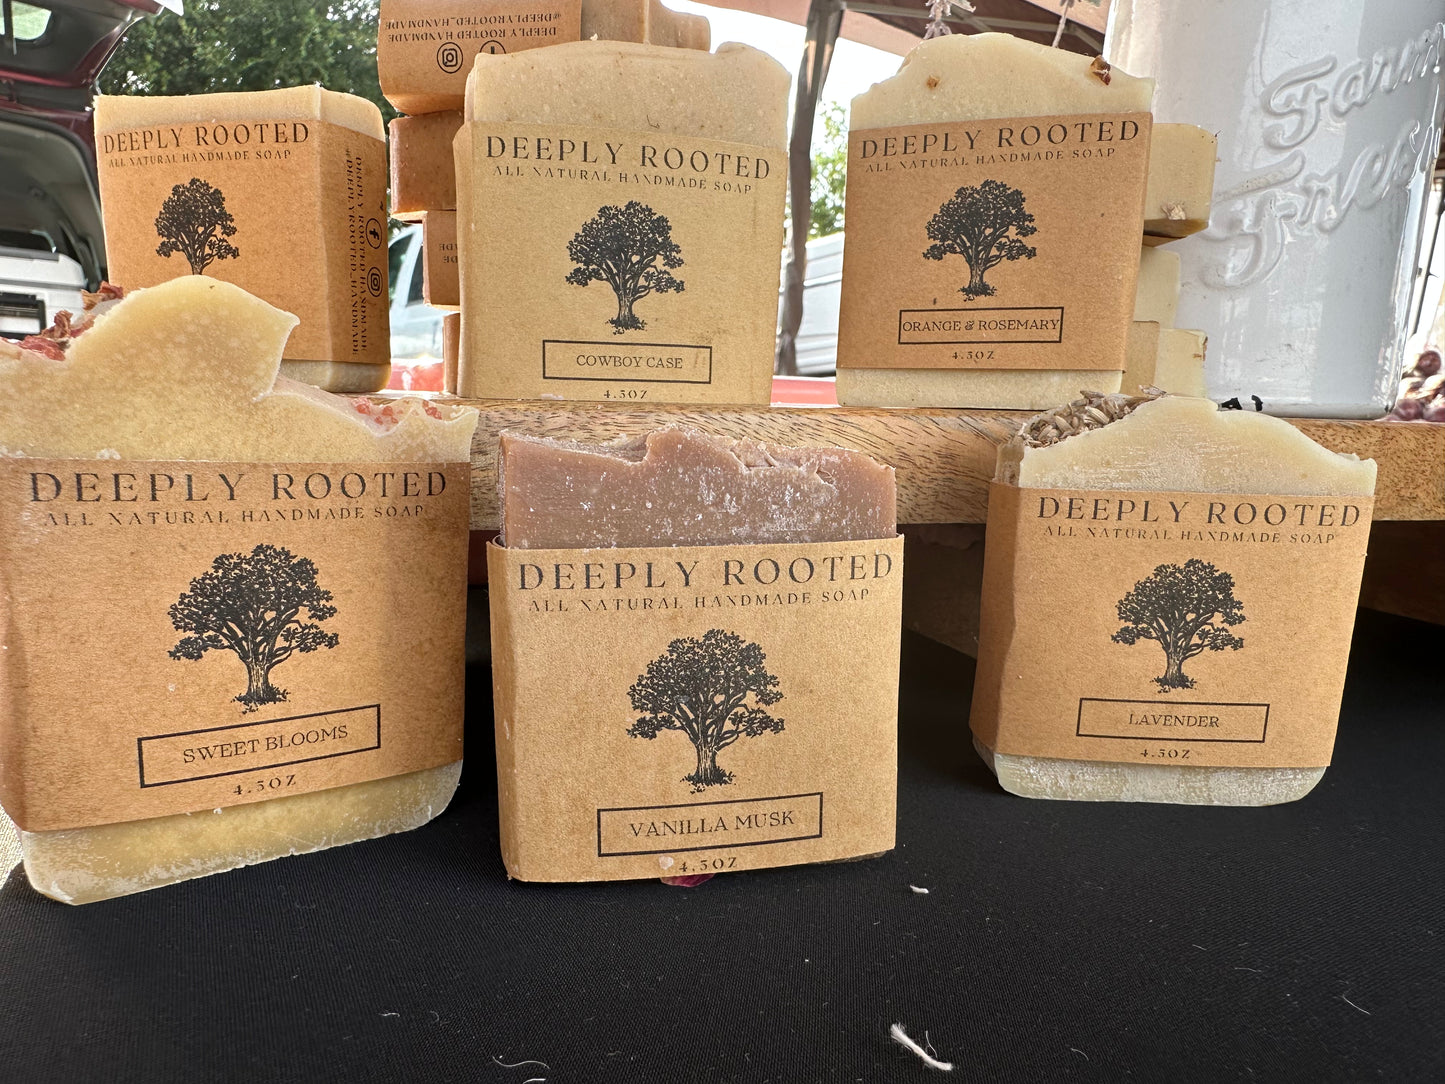 Deeply Rooted Goat Milk Soap